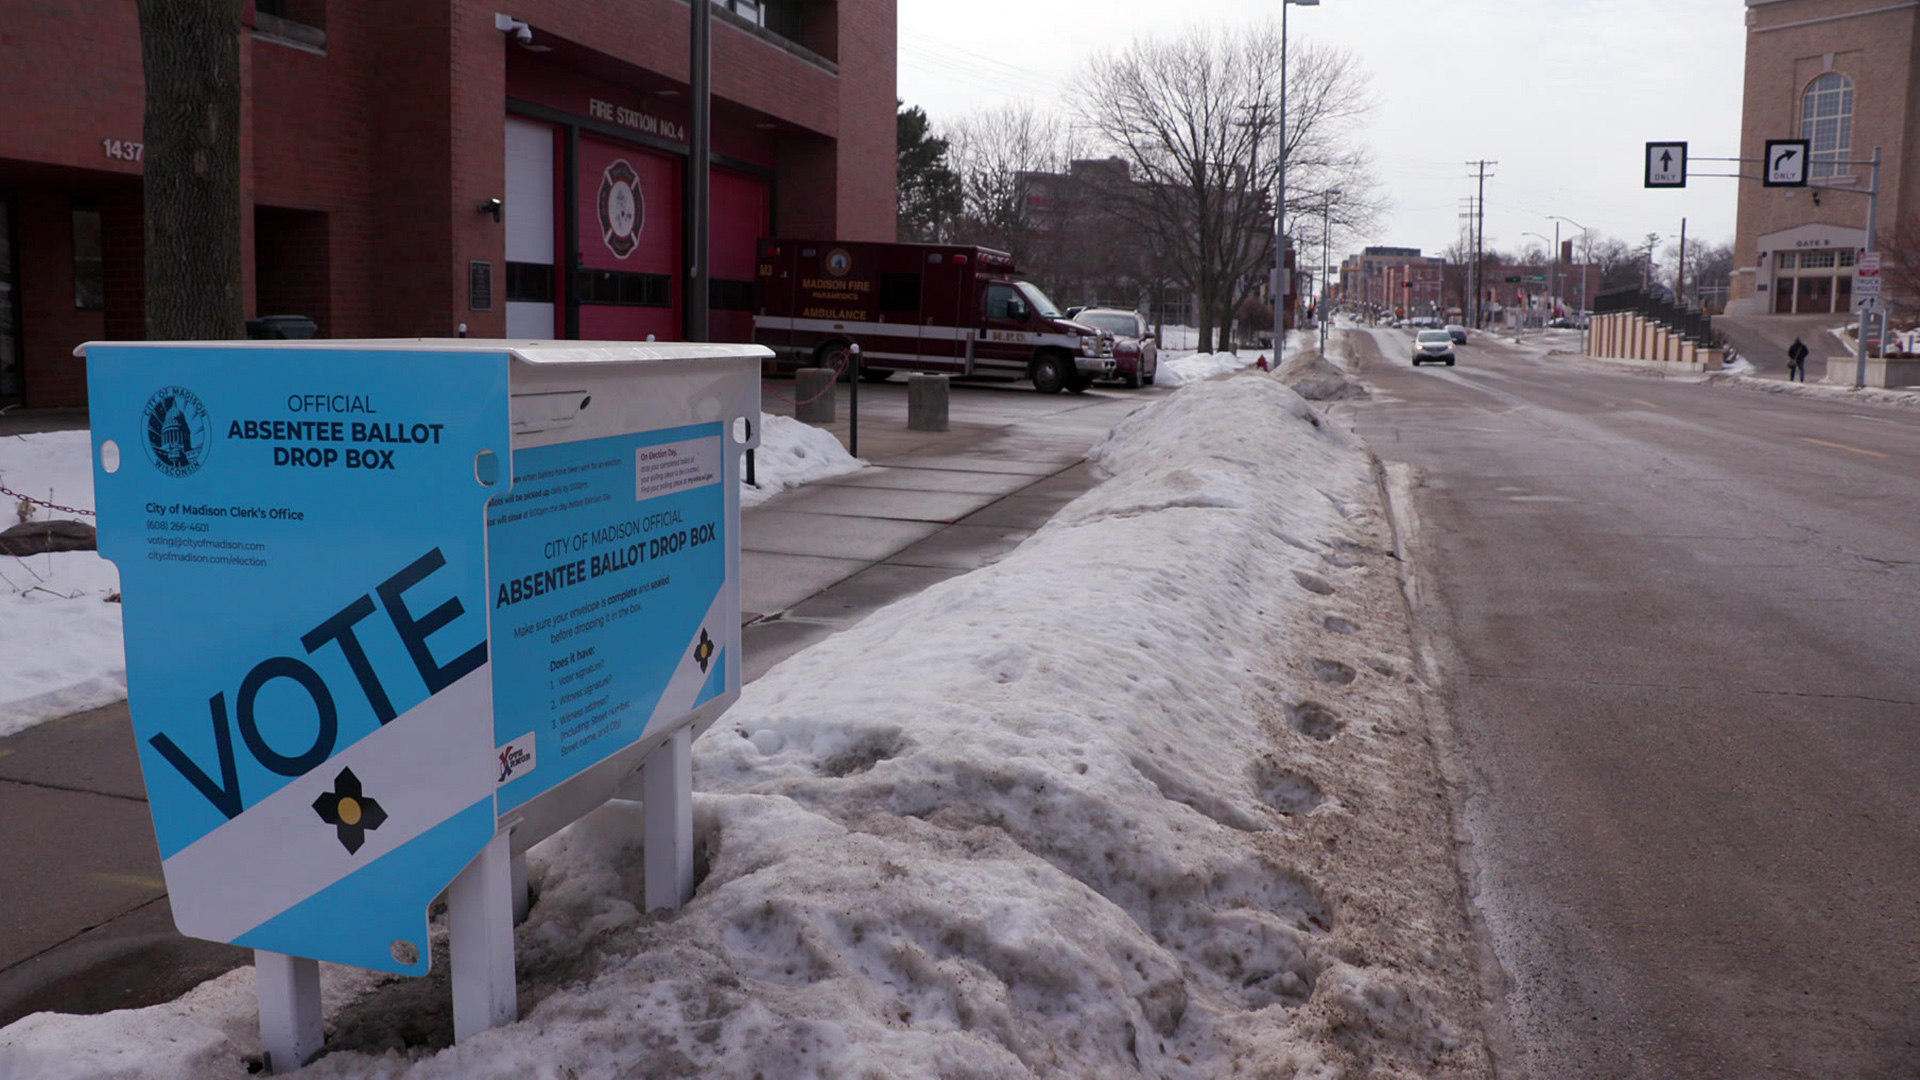 A metal drop box with the word "Vote" stands in a dirty snowbank on the side of a road with a parked ambulance and buildings in the background.